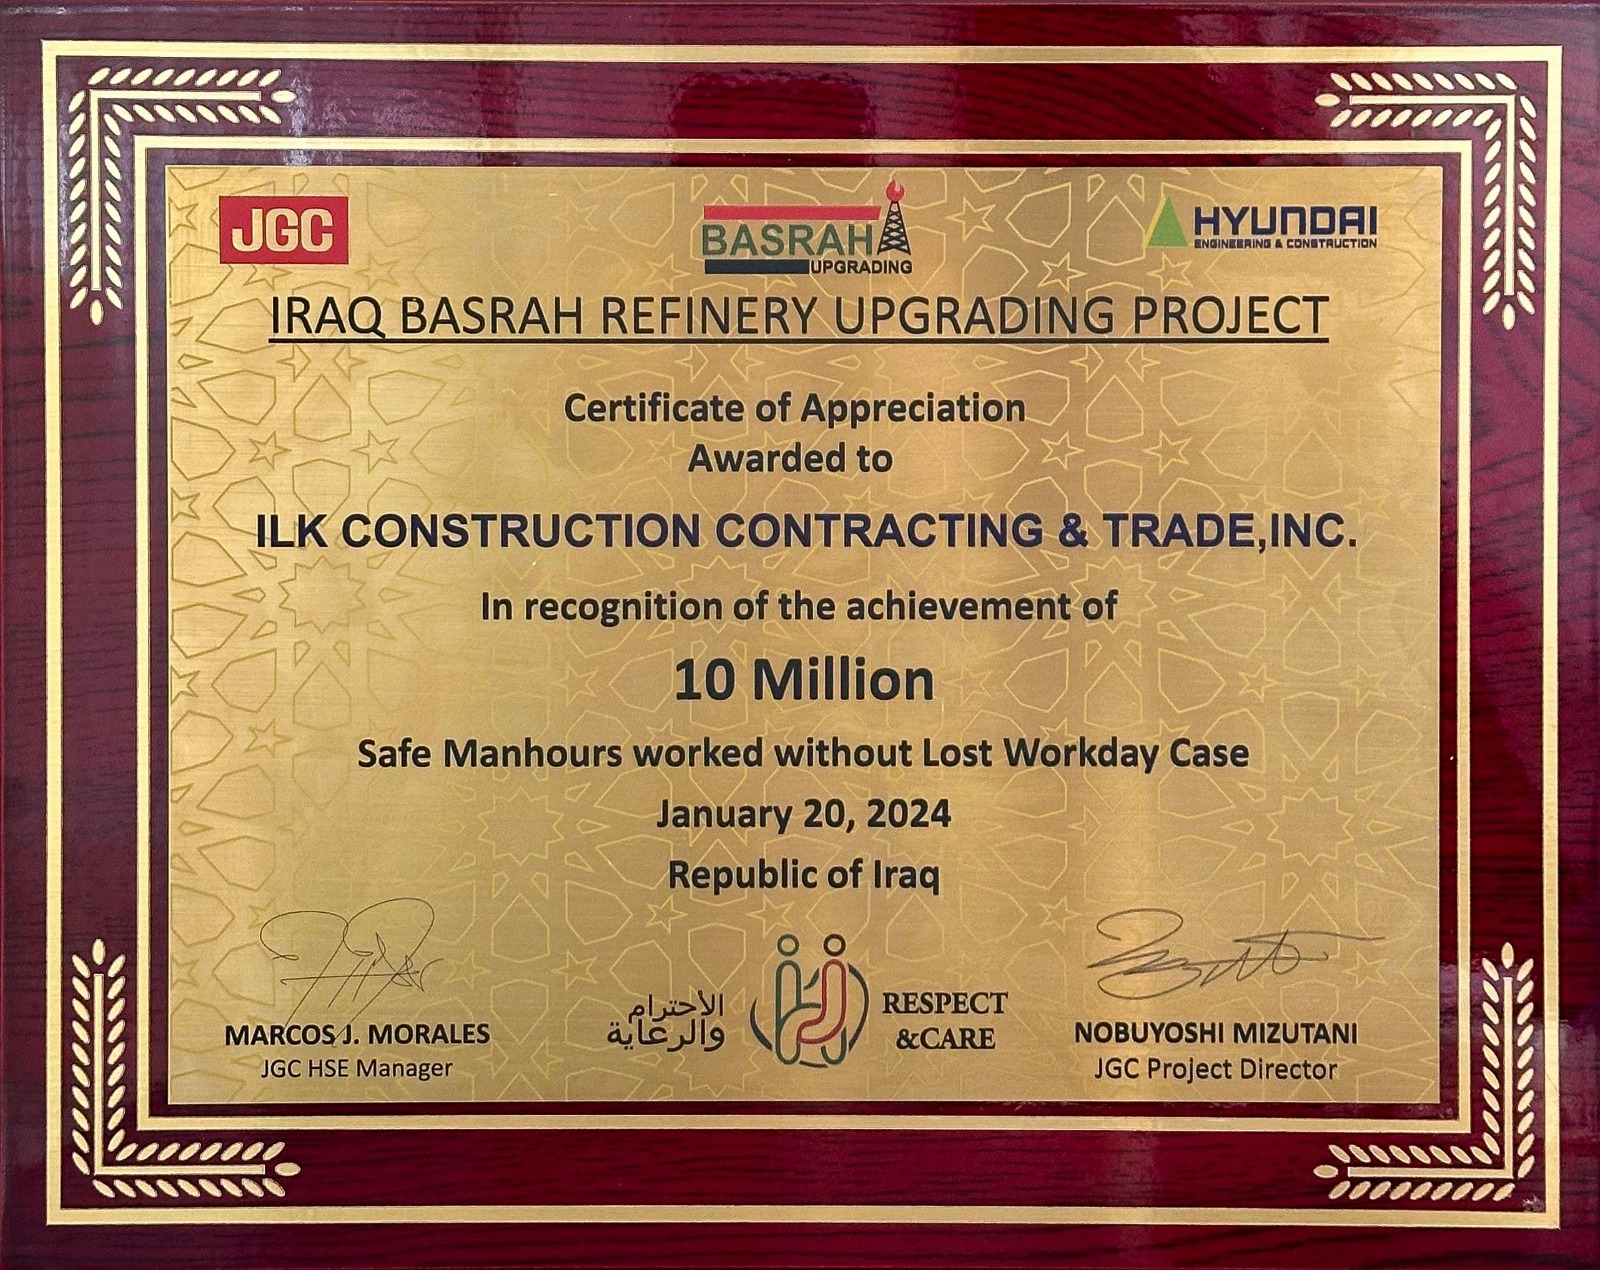 ILK Construction proudly announce receiving of appreciation certificate from JGC for its contribution of 10.000.000 man-hours of work without any lost workday cases for Iraq Basra Refinery Upgrading Project in January 2024